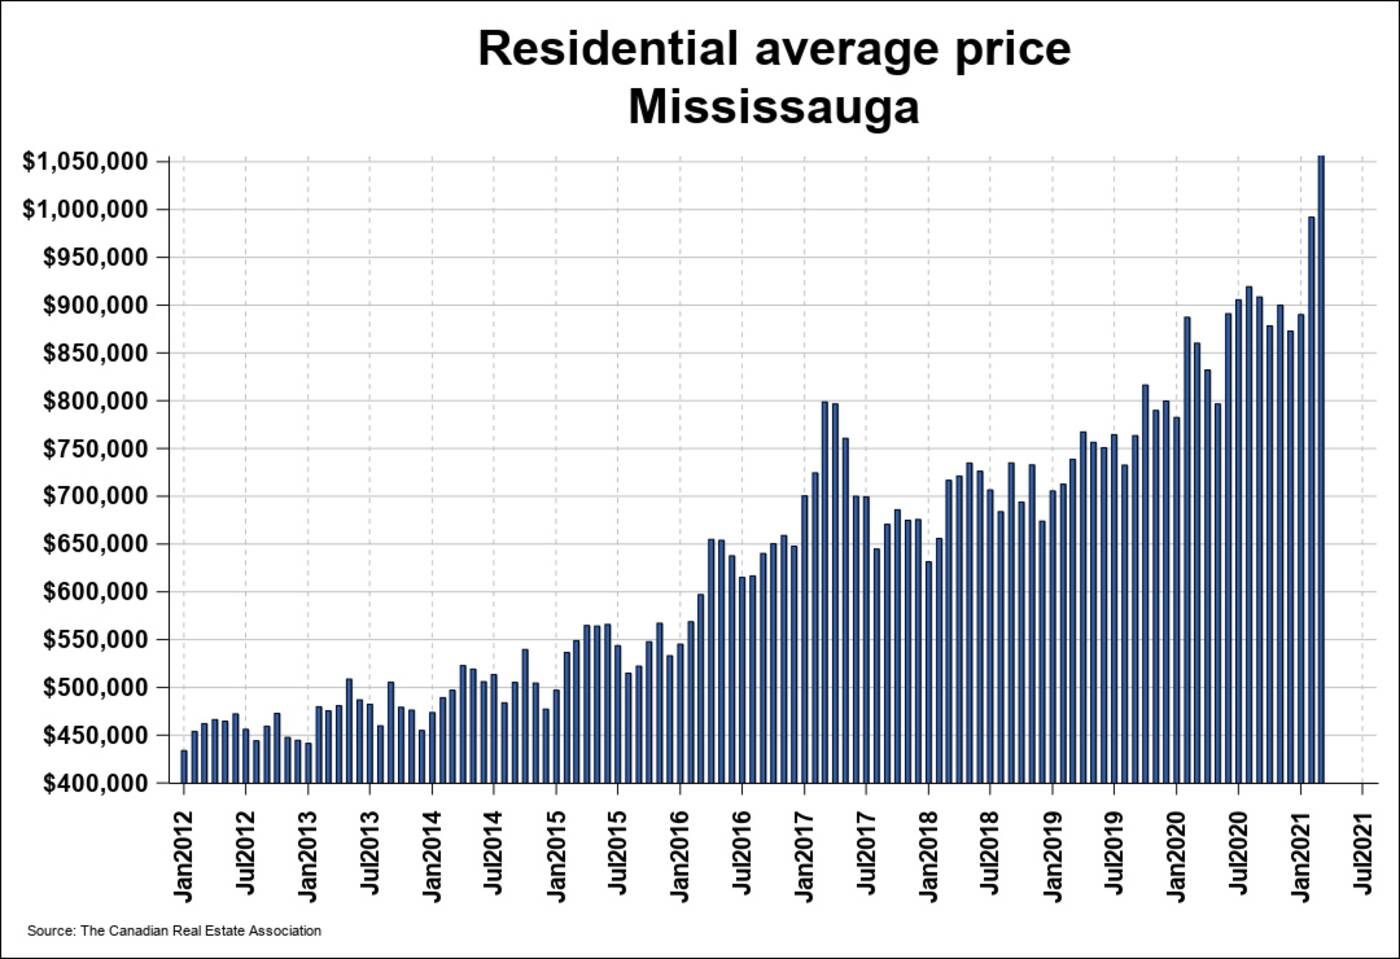 The average home price in Mississauga is now more than 1 million